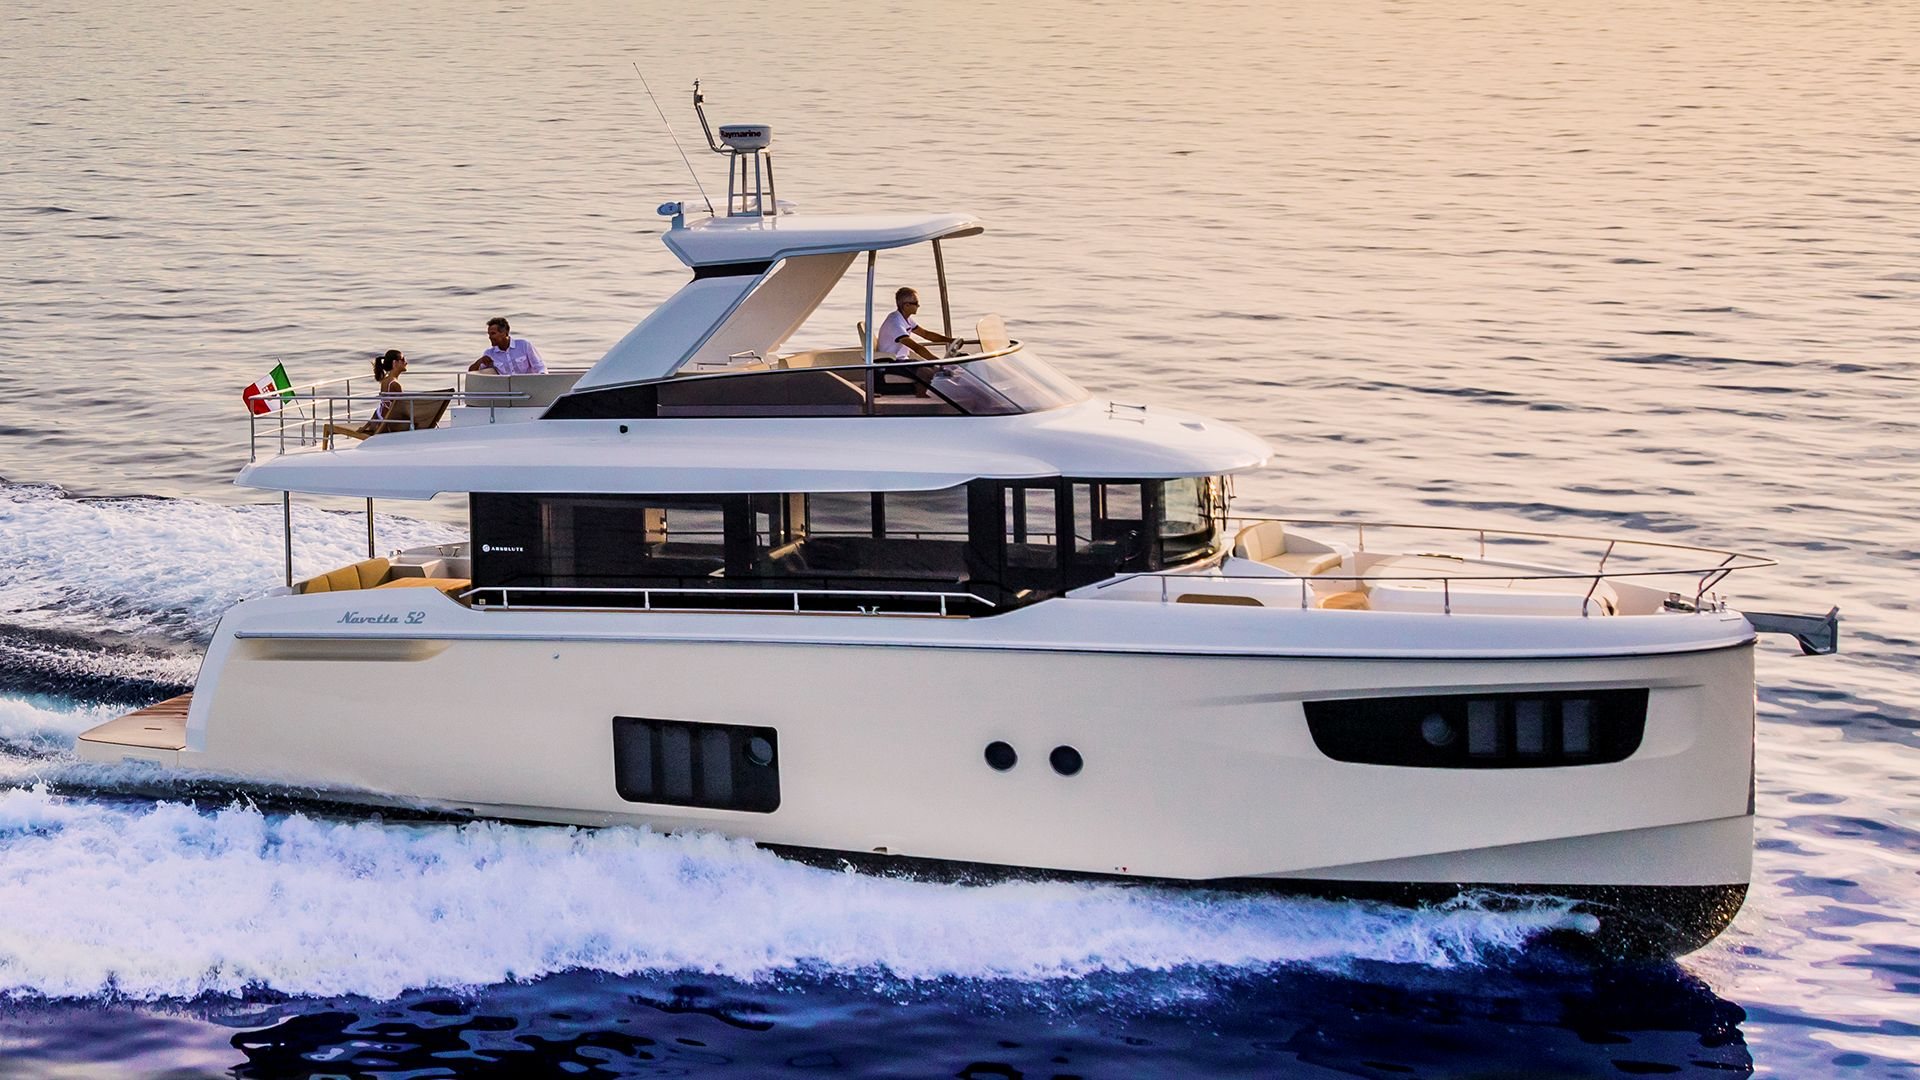 360 VR Virtual Tours of the Absolute Navetta 52